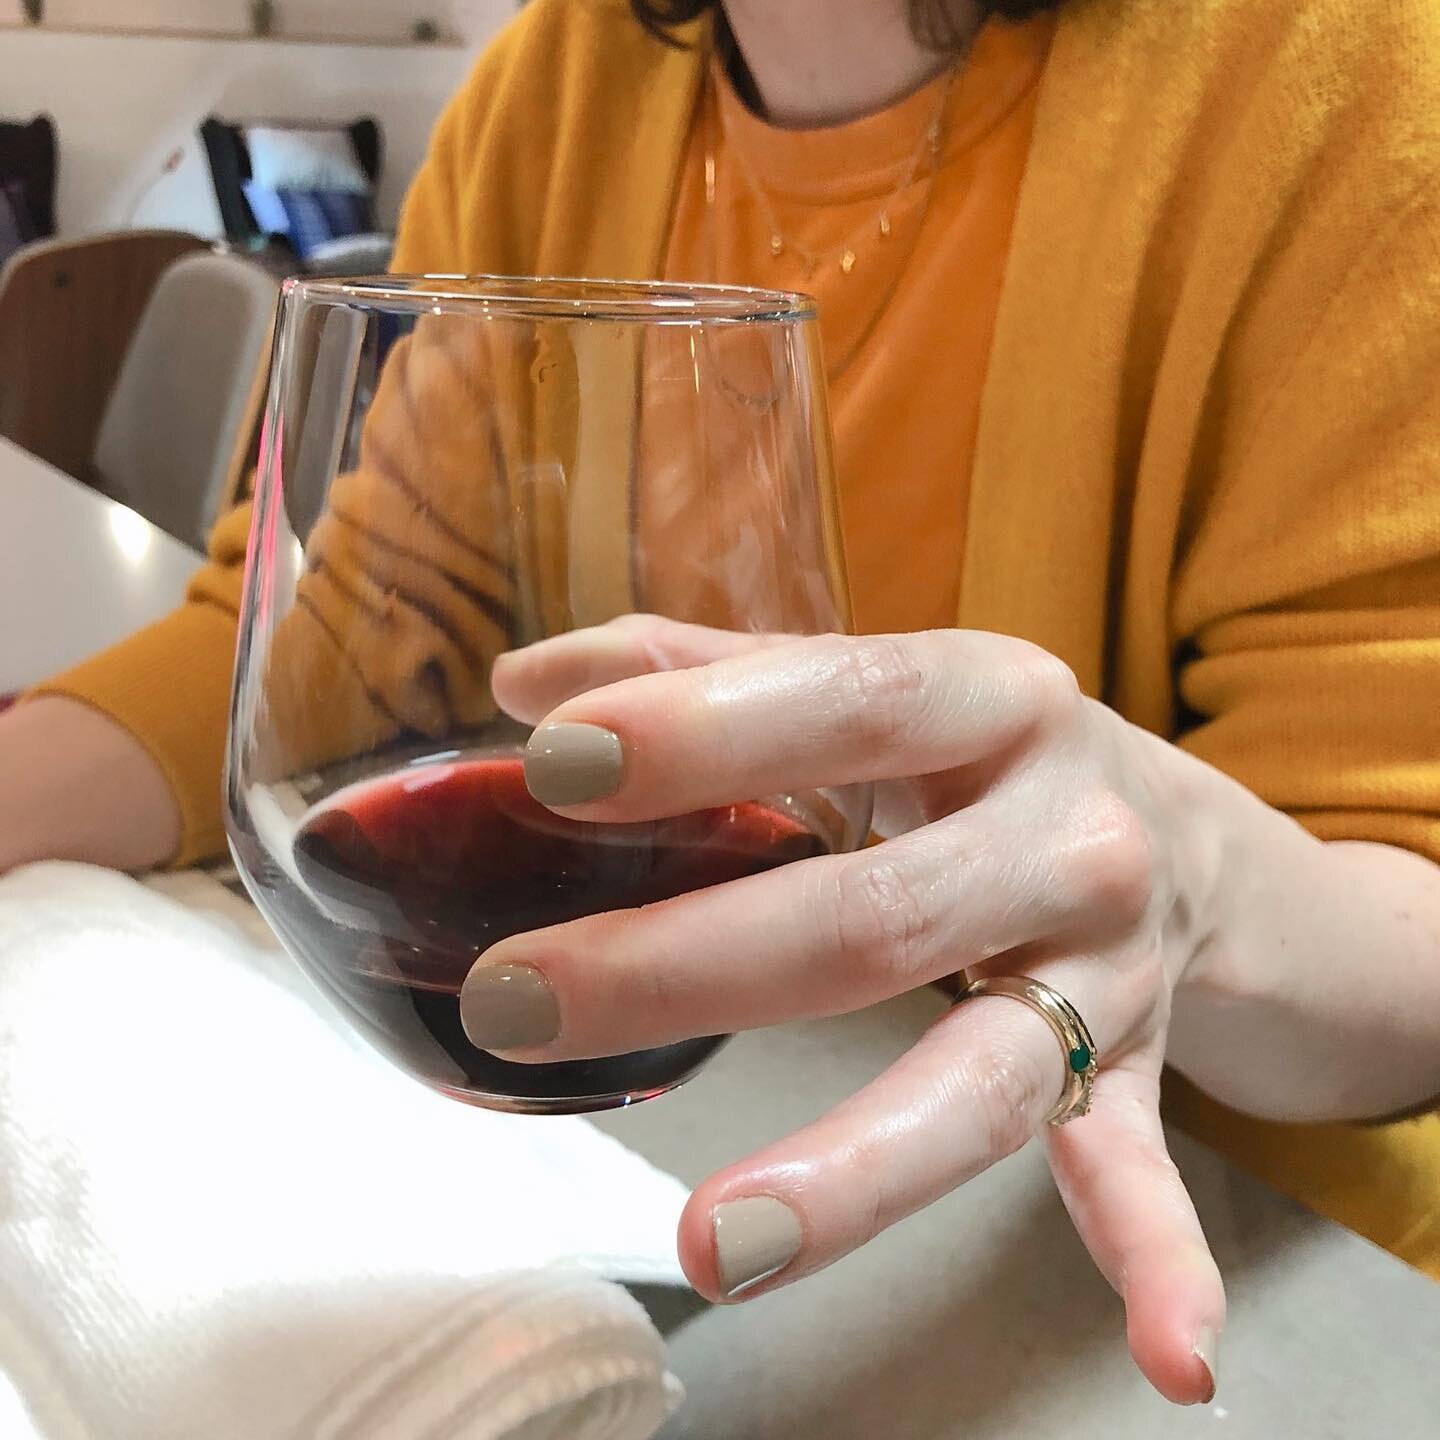 We&rsquo;re expanding our hours, beginning tomorrow! Join us for self-care and half-price wine every week on Wednesday from 11am-8pm.

Want wine, beer and bubbles to enjoy at home? Shop our sister location, @beerhallsf for pick-up or delivery! 

#the